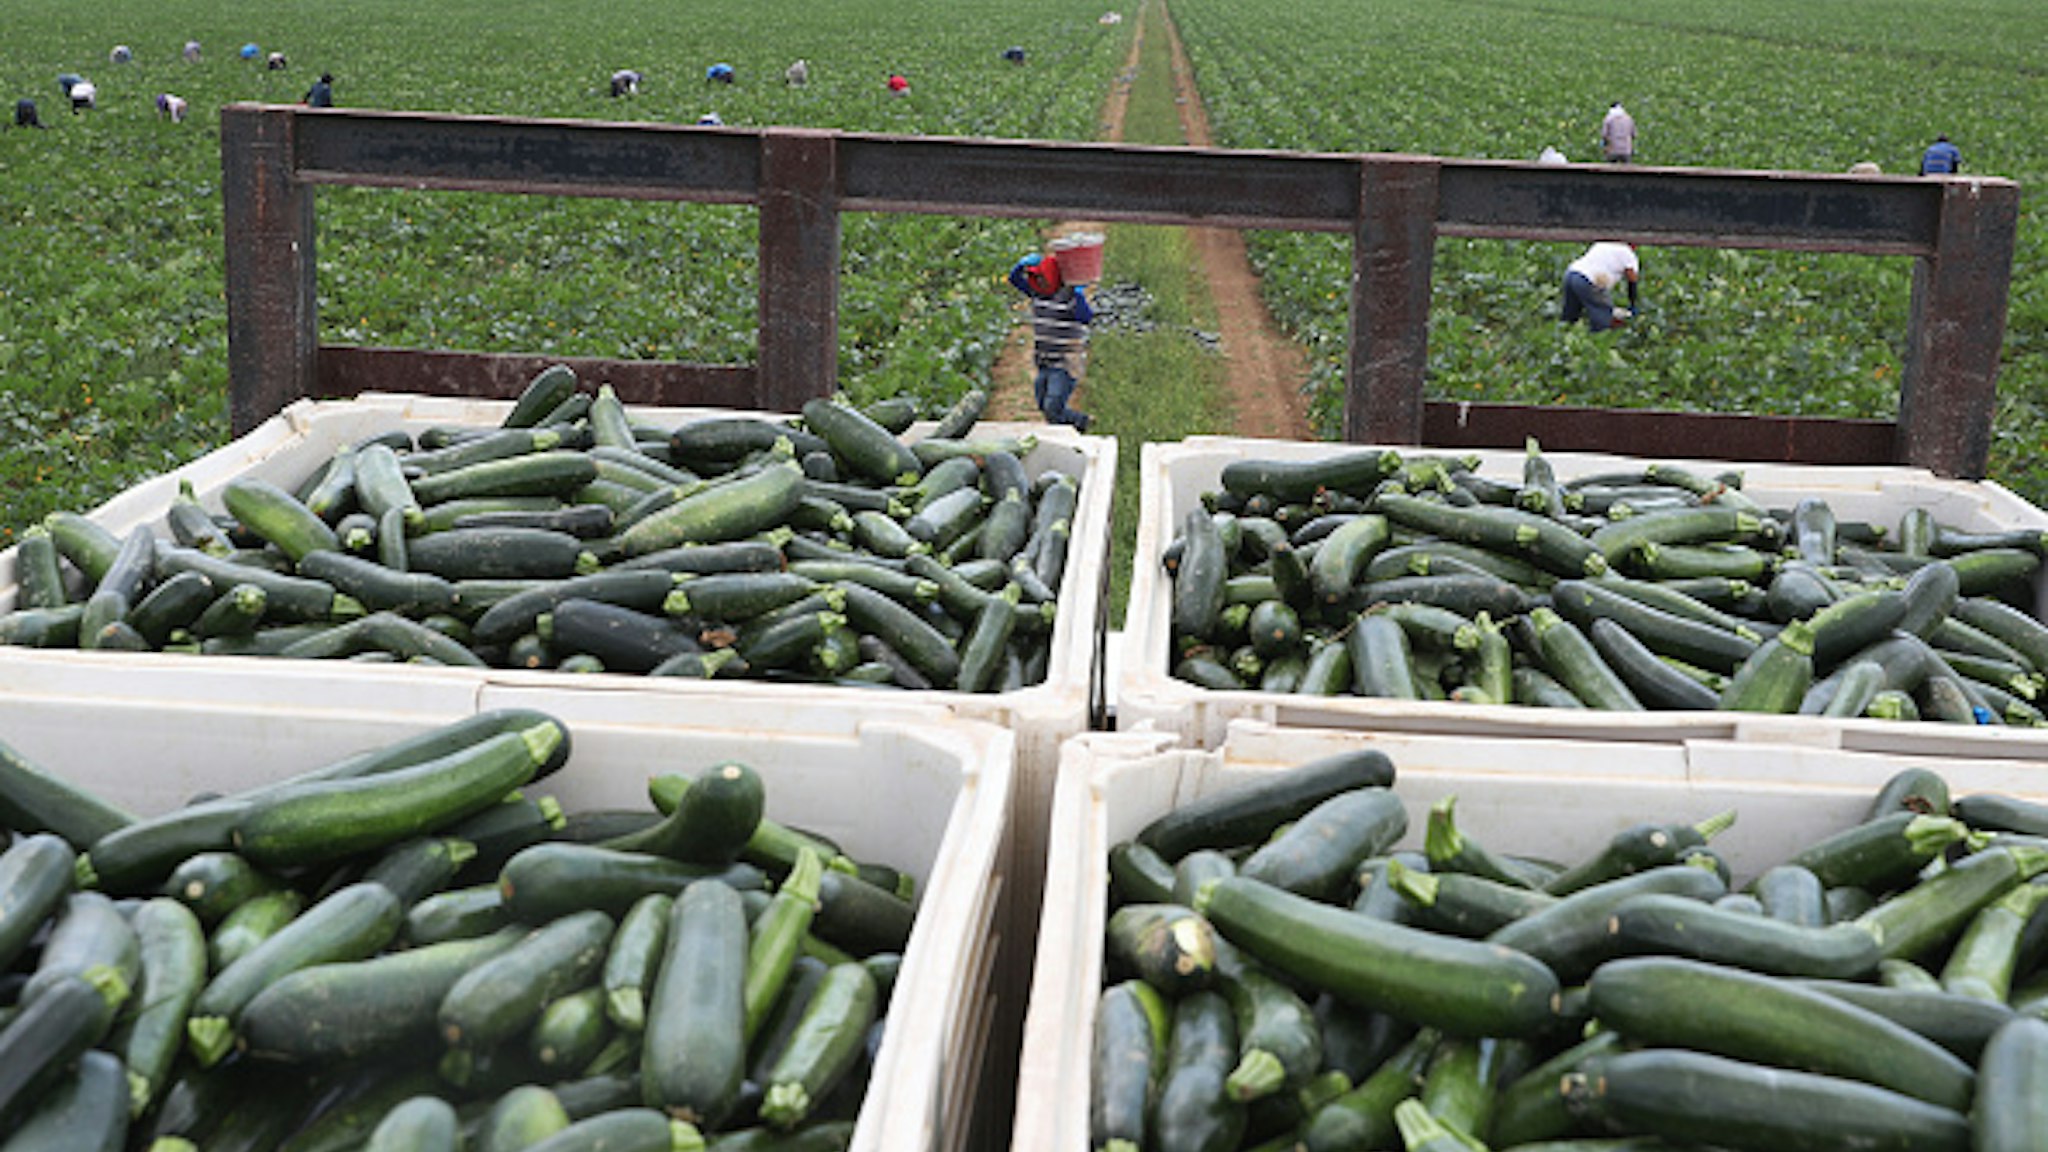 FLORIDA CITY, FLORIDA - APRIL 01: Farm workers harvest zucchini on the Sam Accursio &amp; Son's Farm on April 01, 2020 in Florida City, Florida. Sergio Martinez, a harvest crew supervisor, said that the coronavirus pandemic has caused them "to have to throw crops away due to less demand for produce in stores and restaurants. The farm workers who are essential to providing food for homebound families are worried that if the restaurants stay closed and peoples changed grocery store habits continue they would be out of work with no work for the near future."